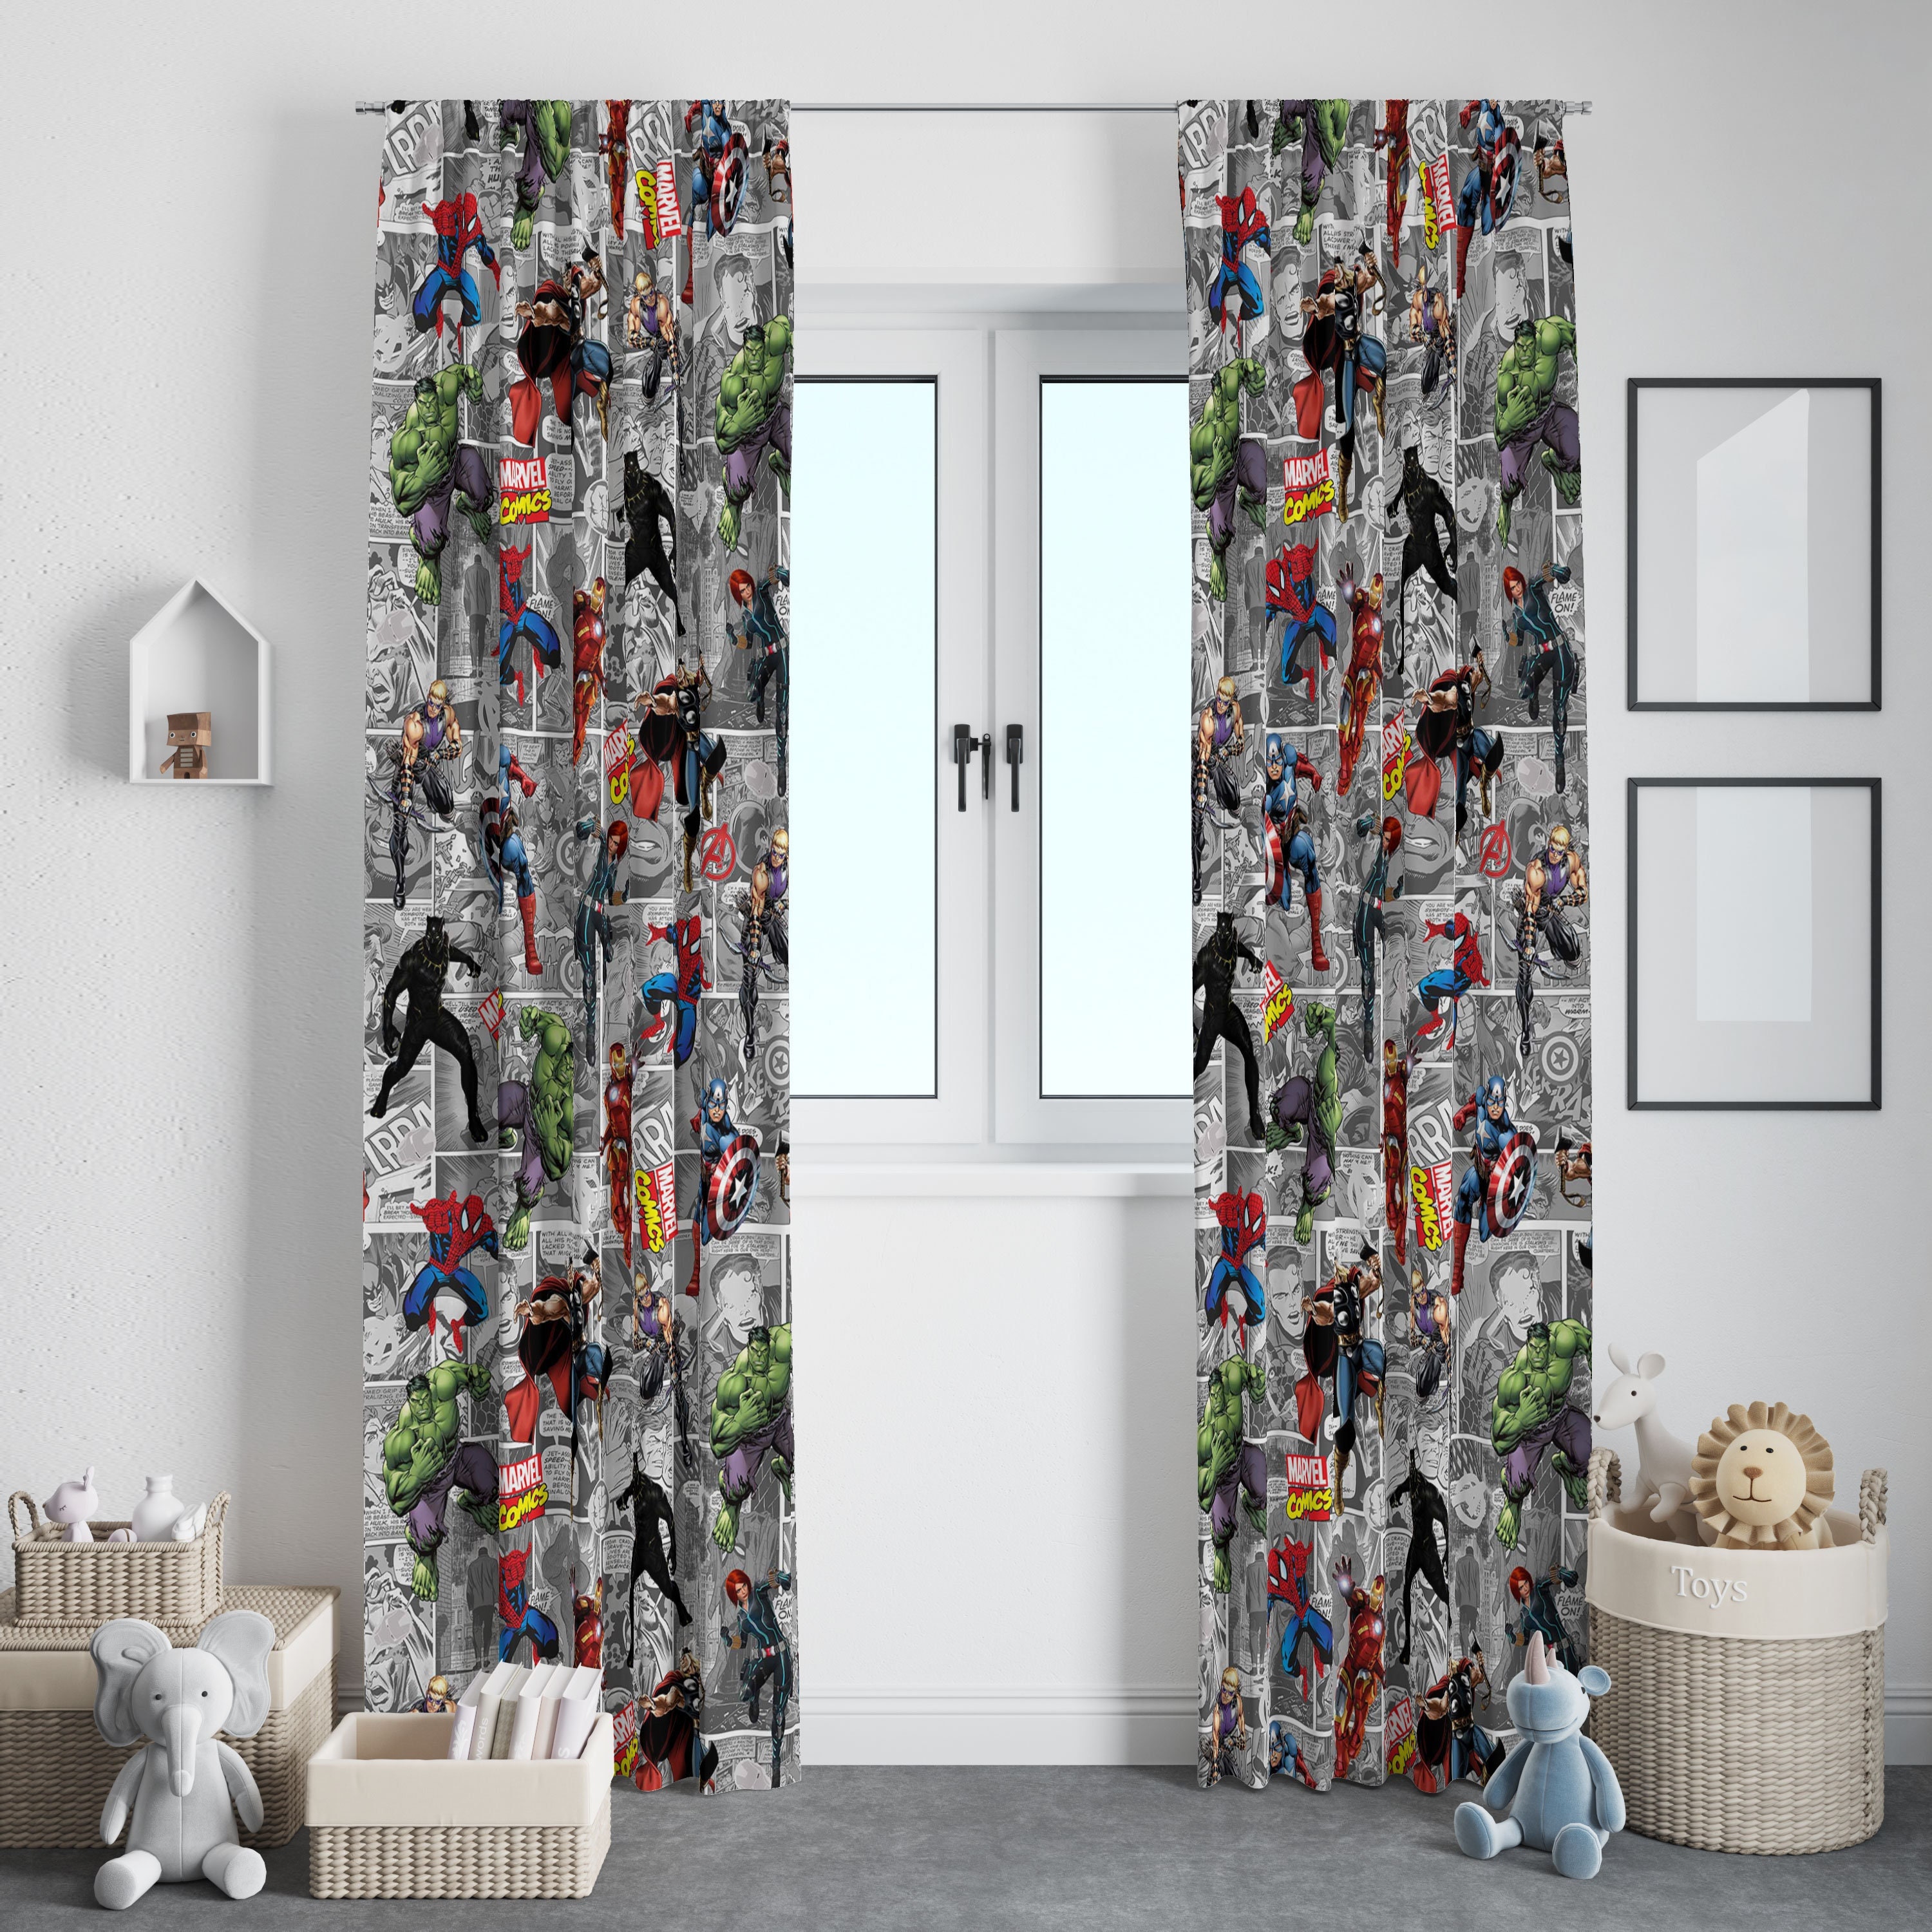 DONEECKL Curtains for Living Room Superhero Courageous Little Girl with a Big Smile in Costume Standing in a Heroic Position Room Darkening Thermal W72 x L84 Multicolor 